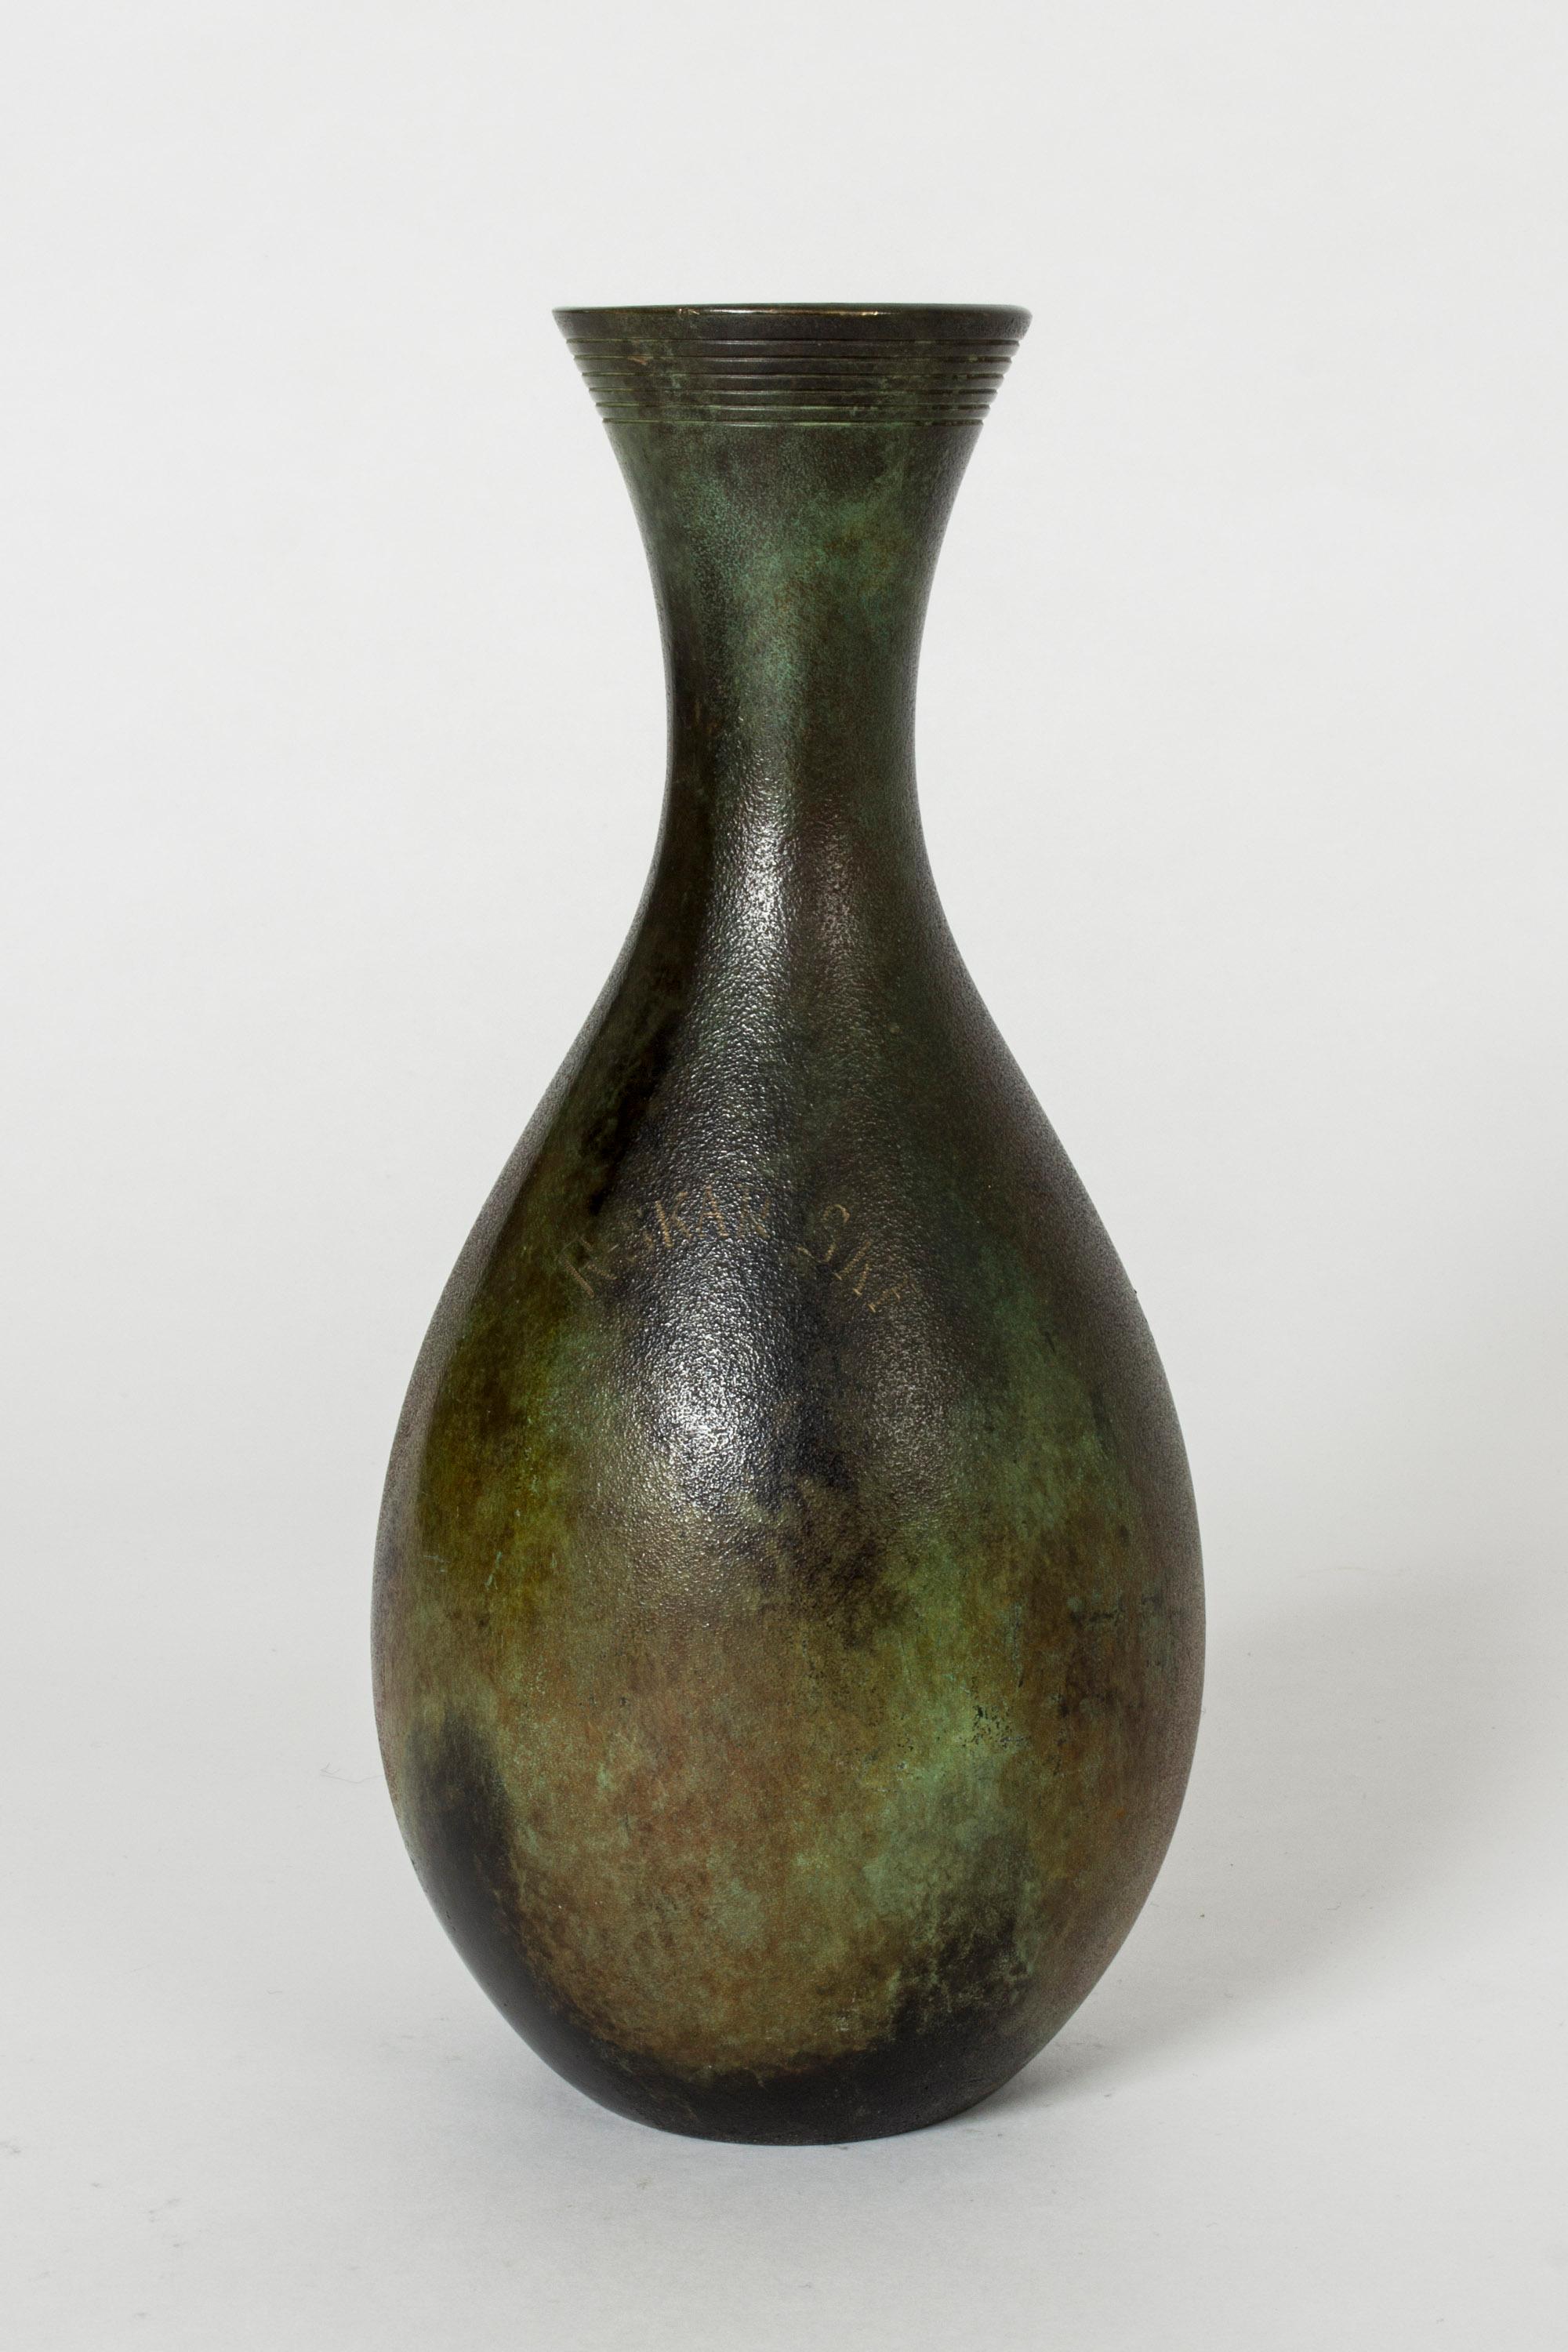 Elegant bronze vase from GAB, patinated dark green in varying nuances. Classic shape with decorative stripes around the rim.